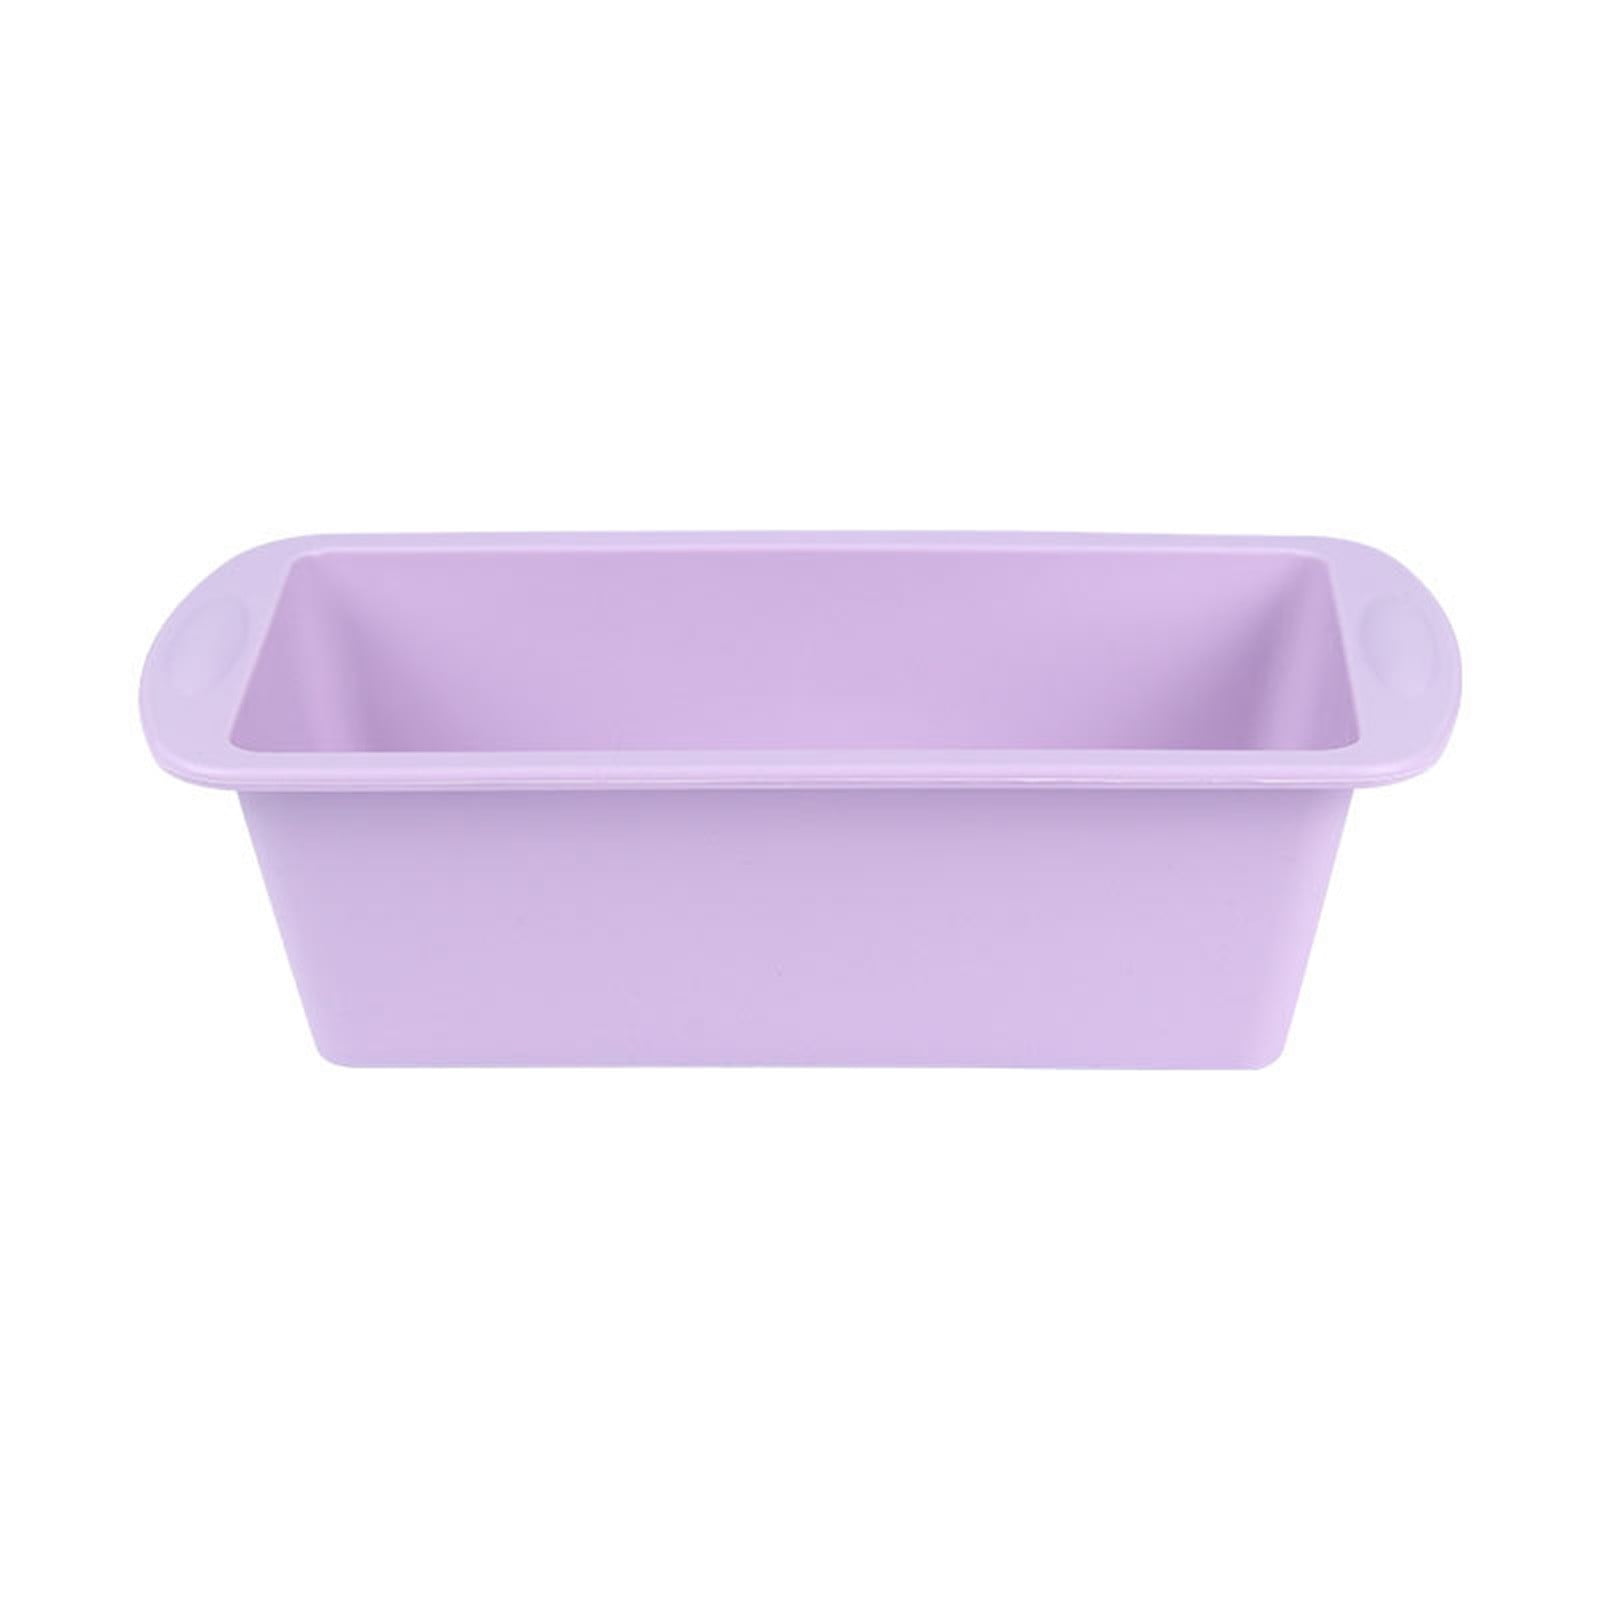 SOV Silicone Bread Loaf Pan, Non-Stick Loaf Pan and Easy Release, Ideal for  Bread, Toast, Brownie, Homemade Cakes and Quiche Pie, BPA Free and